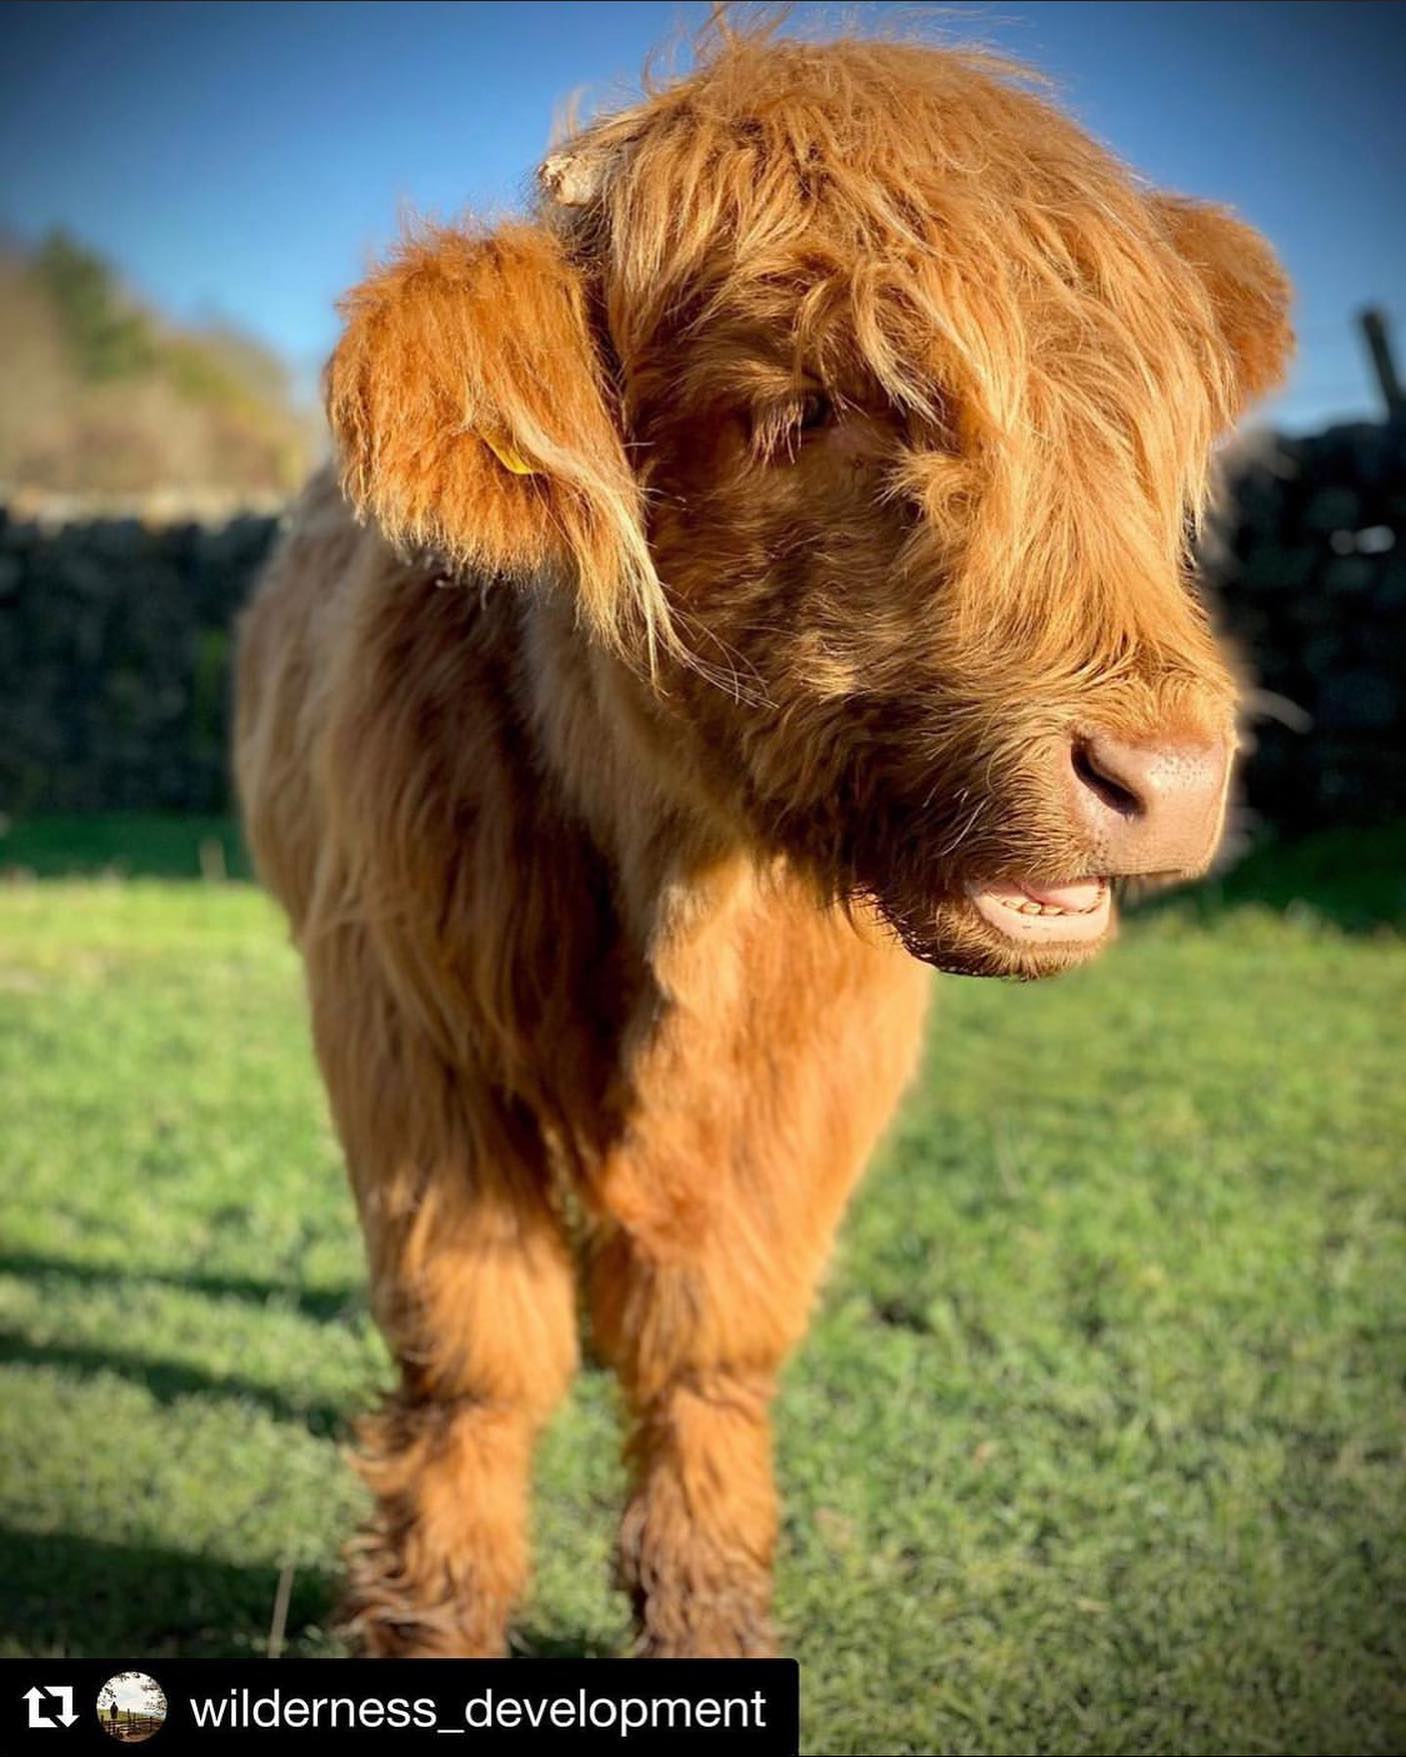 🐮 Wildlife Wednesday 🐮

We love seeing these fab Highland Cows out and about, they’re just so pho...